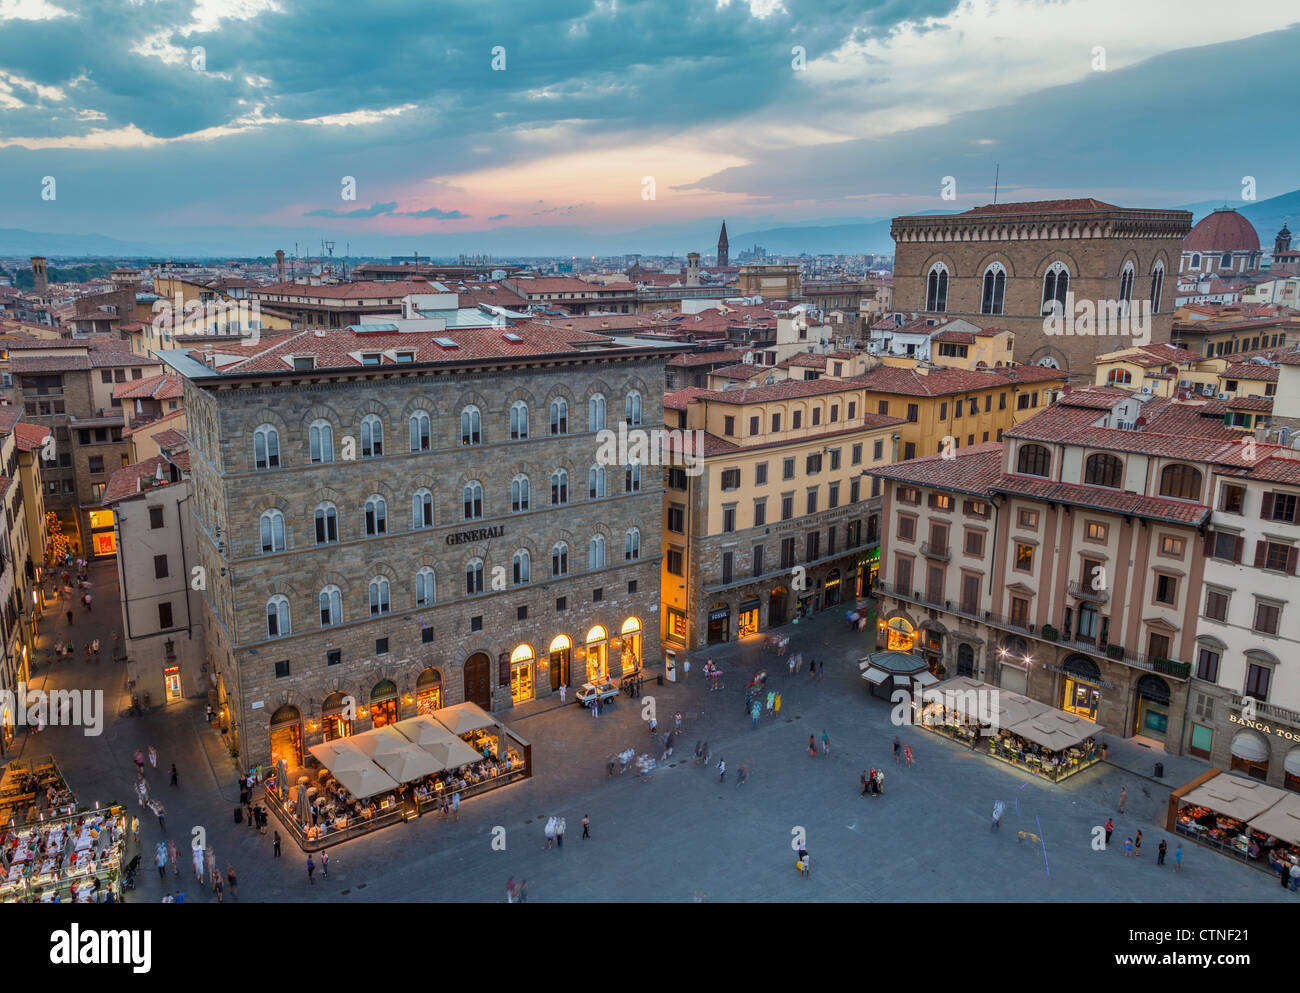 Sunset view of the city of Florence with the Piazza della Signoria in the foreground from the tower of the Palazzo Vecchio Stock Photo